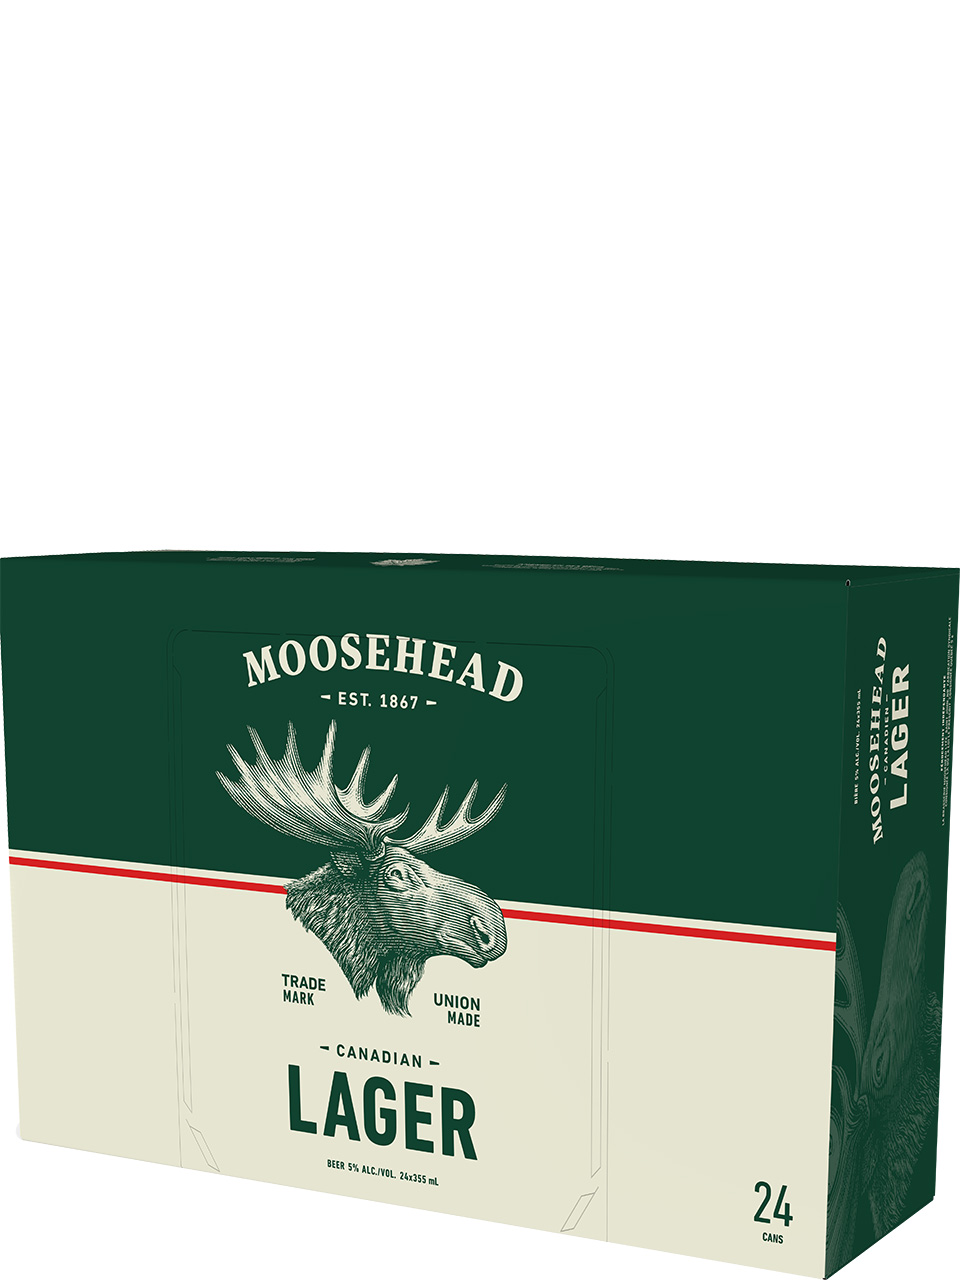 Moosehead Lager 24 Pack Cans